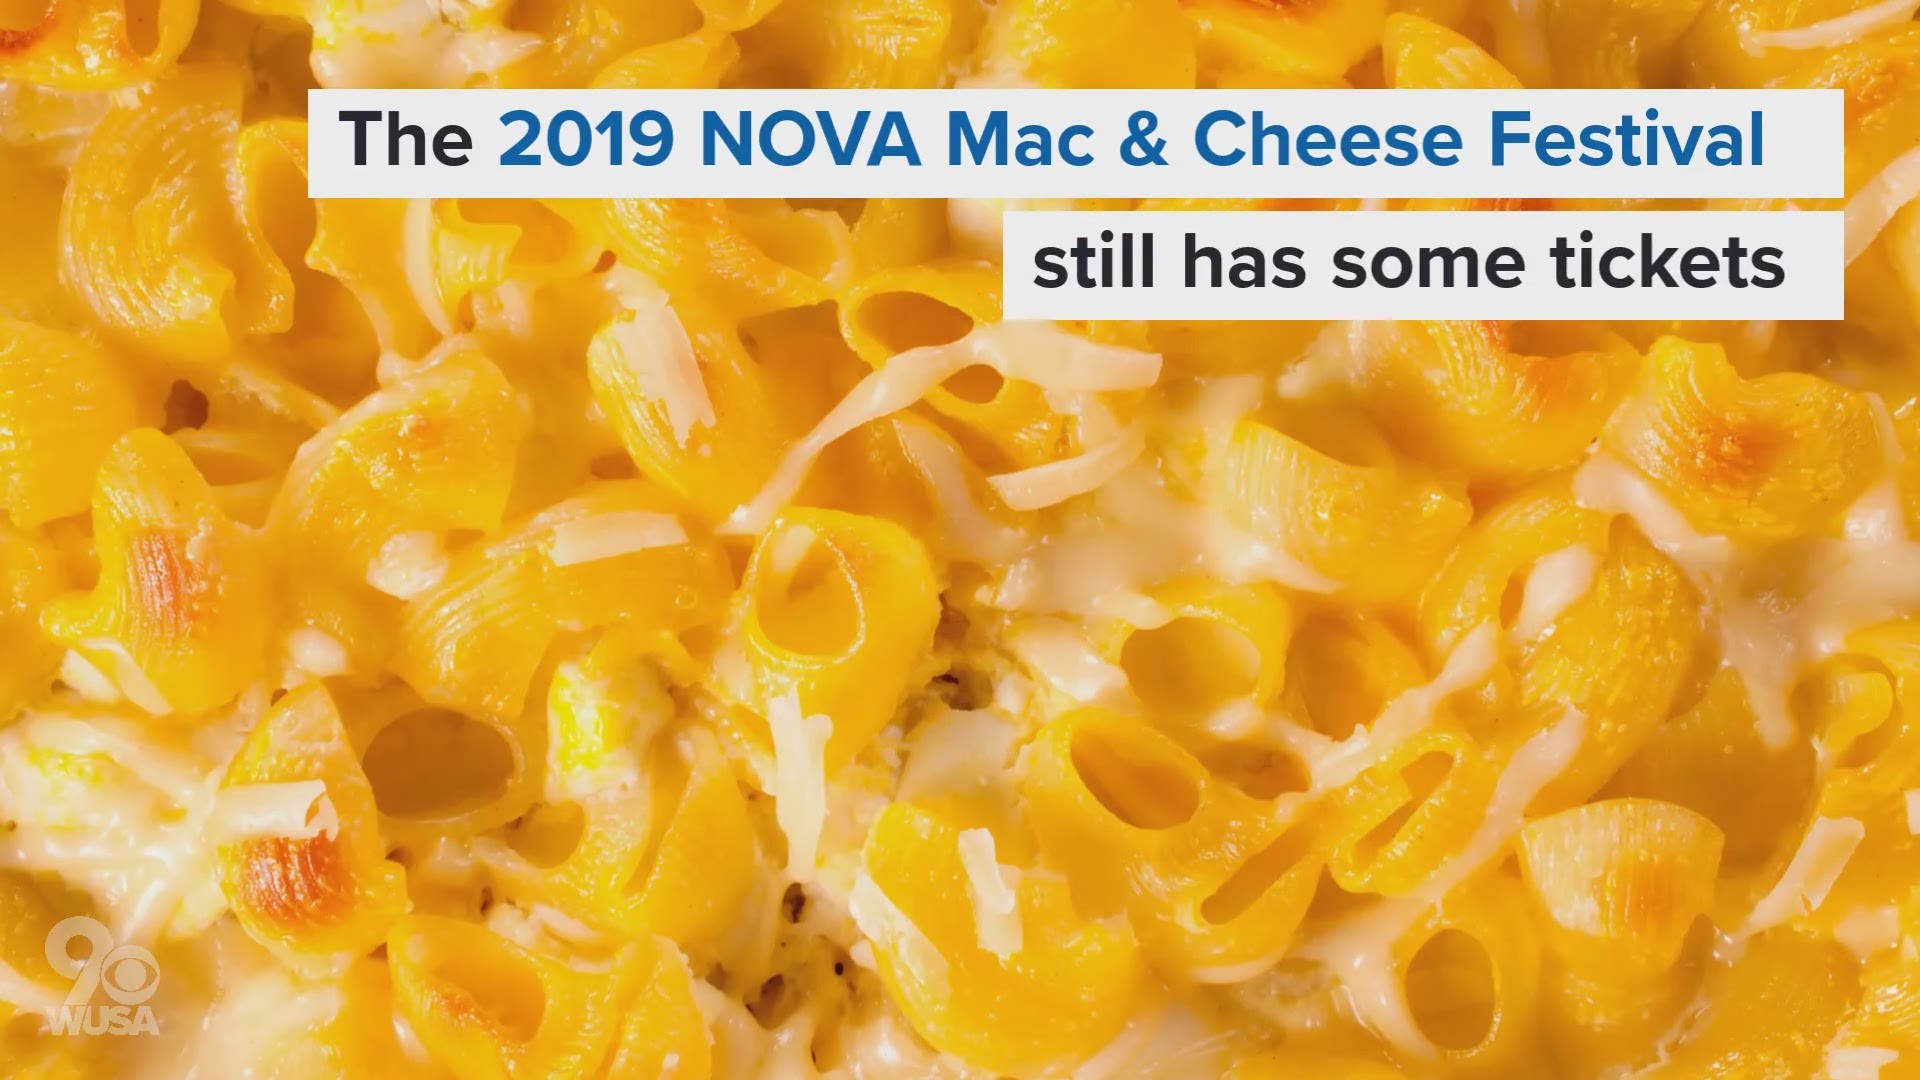 If you like mac and cheese, this is the event for you.